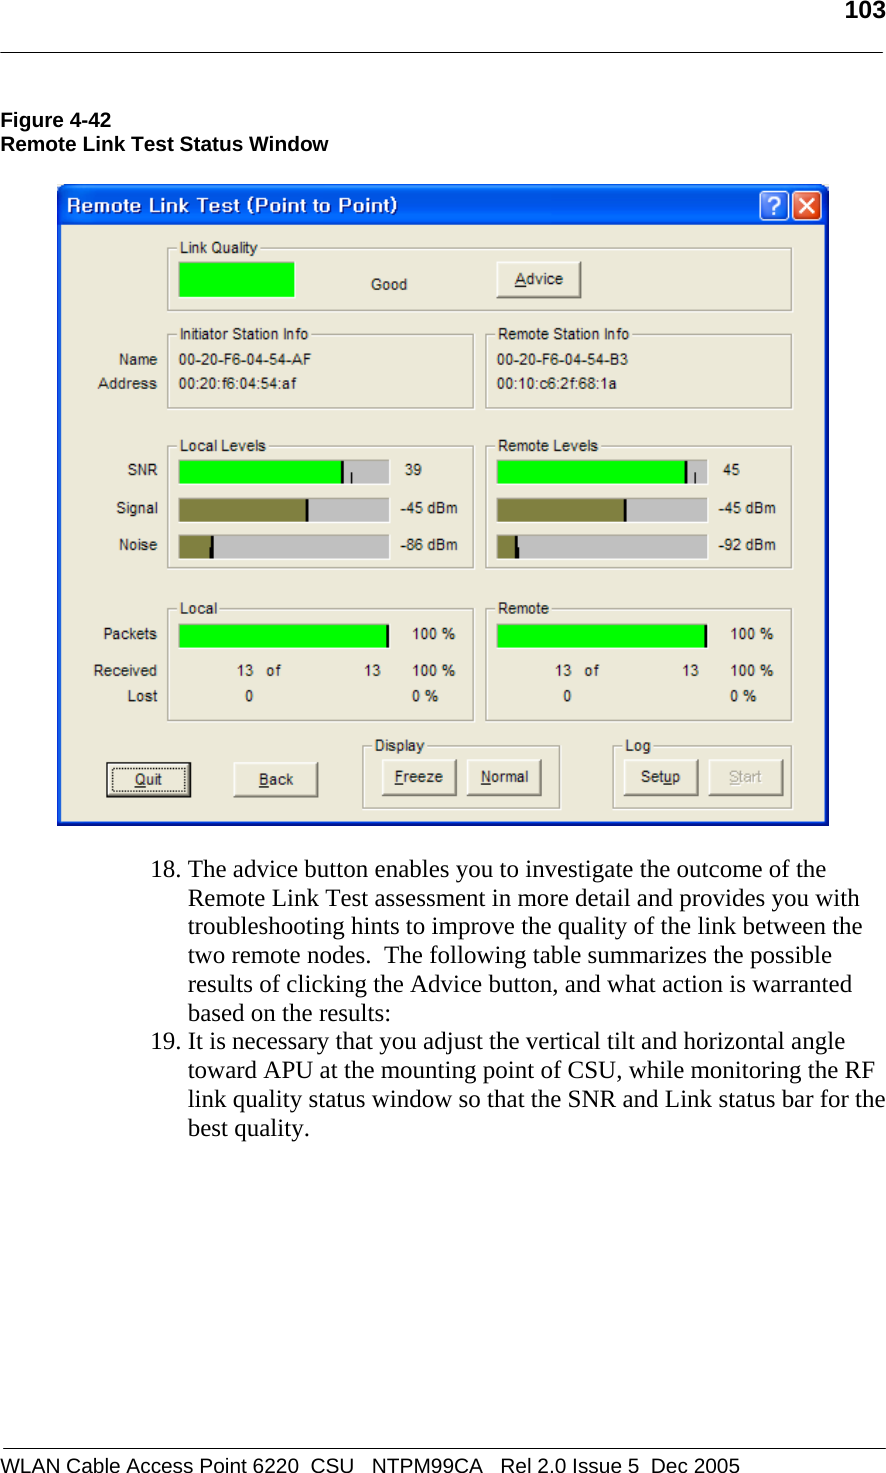   103  WLAN Cable Access Point 6220  CSU   NTPM99CA   Rel 2.0 Issue 5  Dec 2005 Figure 4-42 Remote Link Test Status Window    18. The advice button enables you to investigate the outcome of the Remote Link Test assessment in more detail and provides you with troubleshooting hints to improve the quality of the link between the two remote nodes.  The following table summarizes the possible results of clicking the Advice button, and what action is warranted based on the results: 19. It is necessary that you adjust the vertical tilt and horizontal angle toward APU at the mounting point of CSU, while monitoring the RF link quality status window so that the SNR and Link status bar for the best quality.  